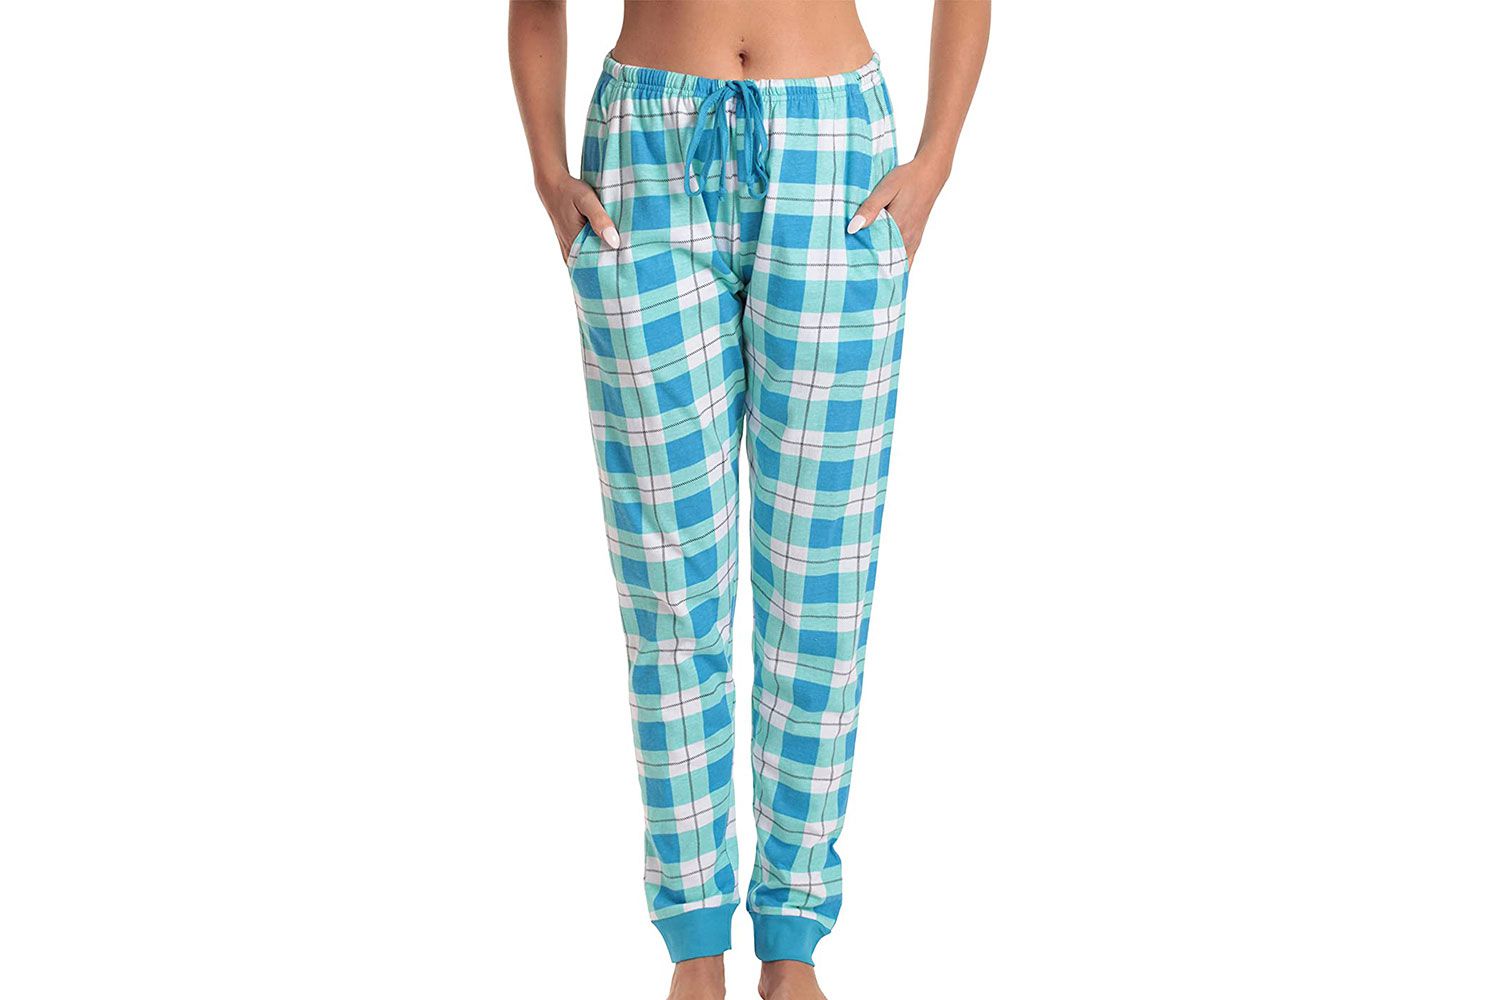 13 Amazing Pajama Pants For Women for 2023